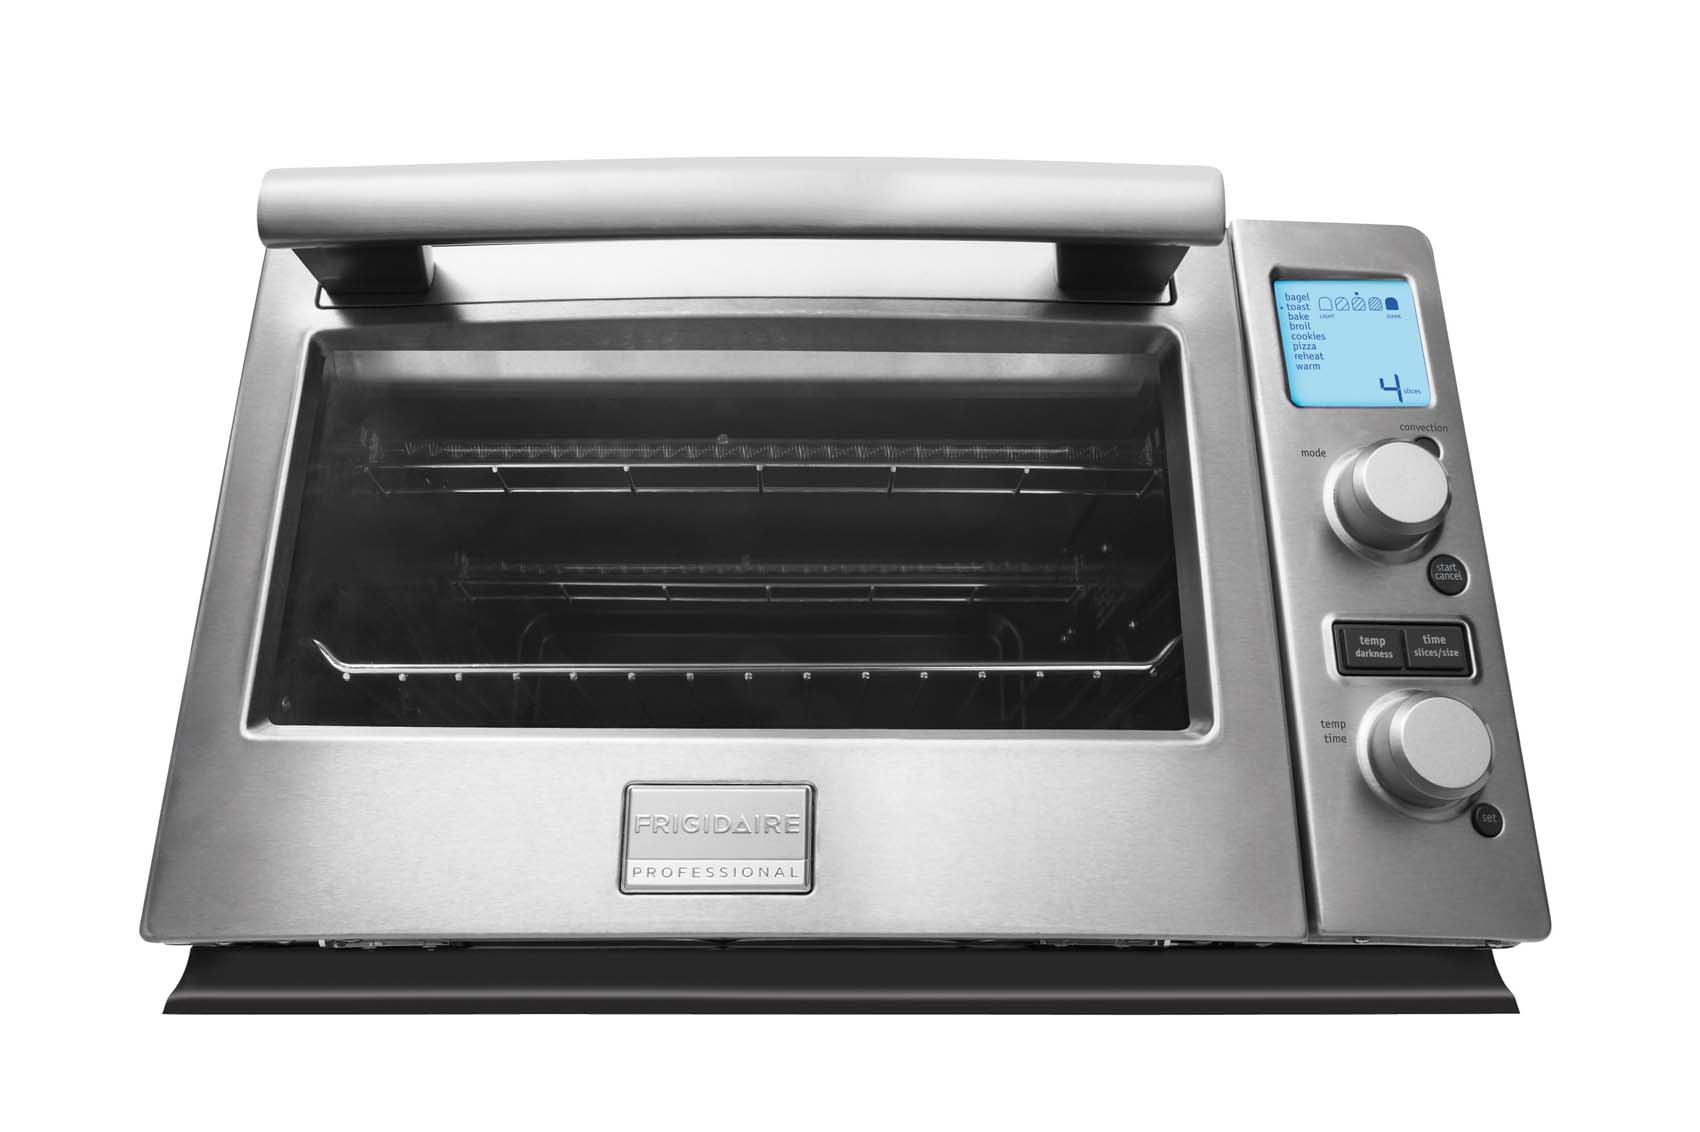 Frigidaire Professional 6-Slice Infrared Convection Toaster Oven, Stainless  Steel for Sale in Queens, NY - OfferUp